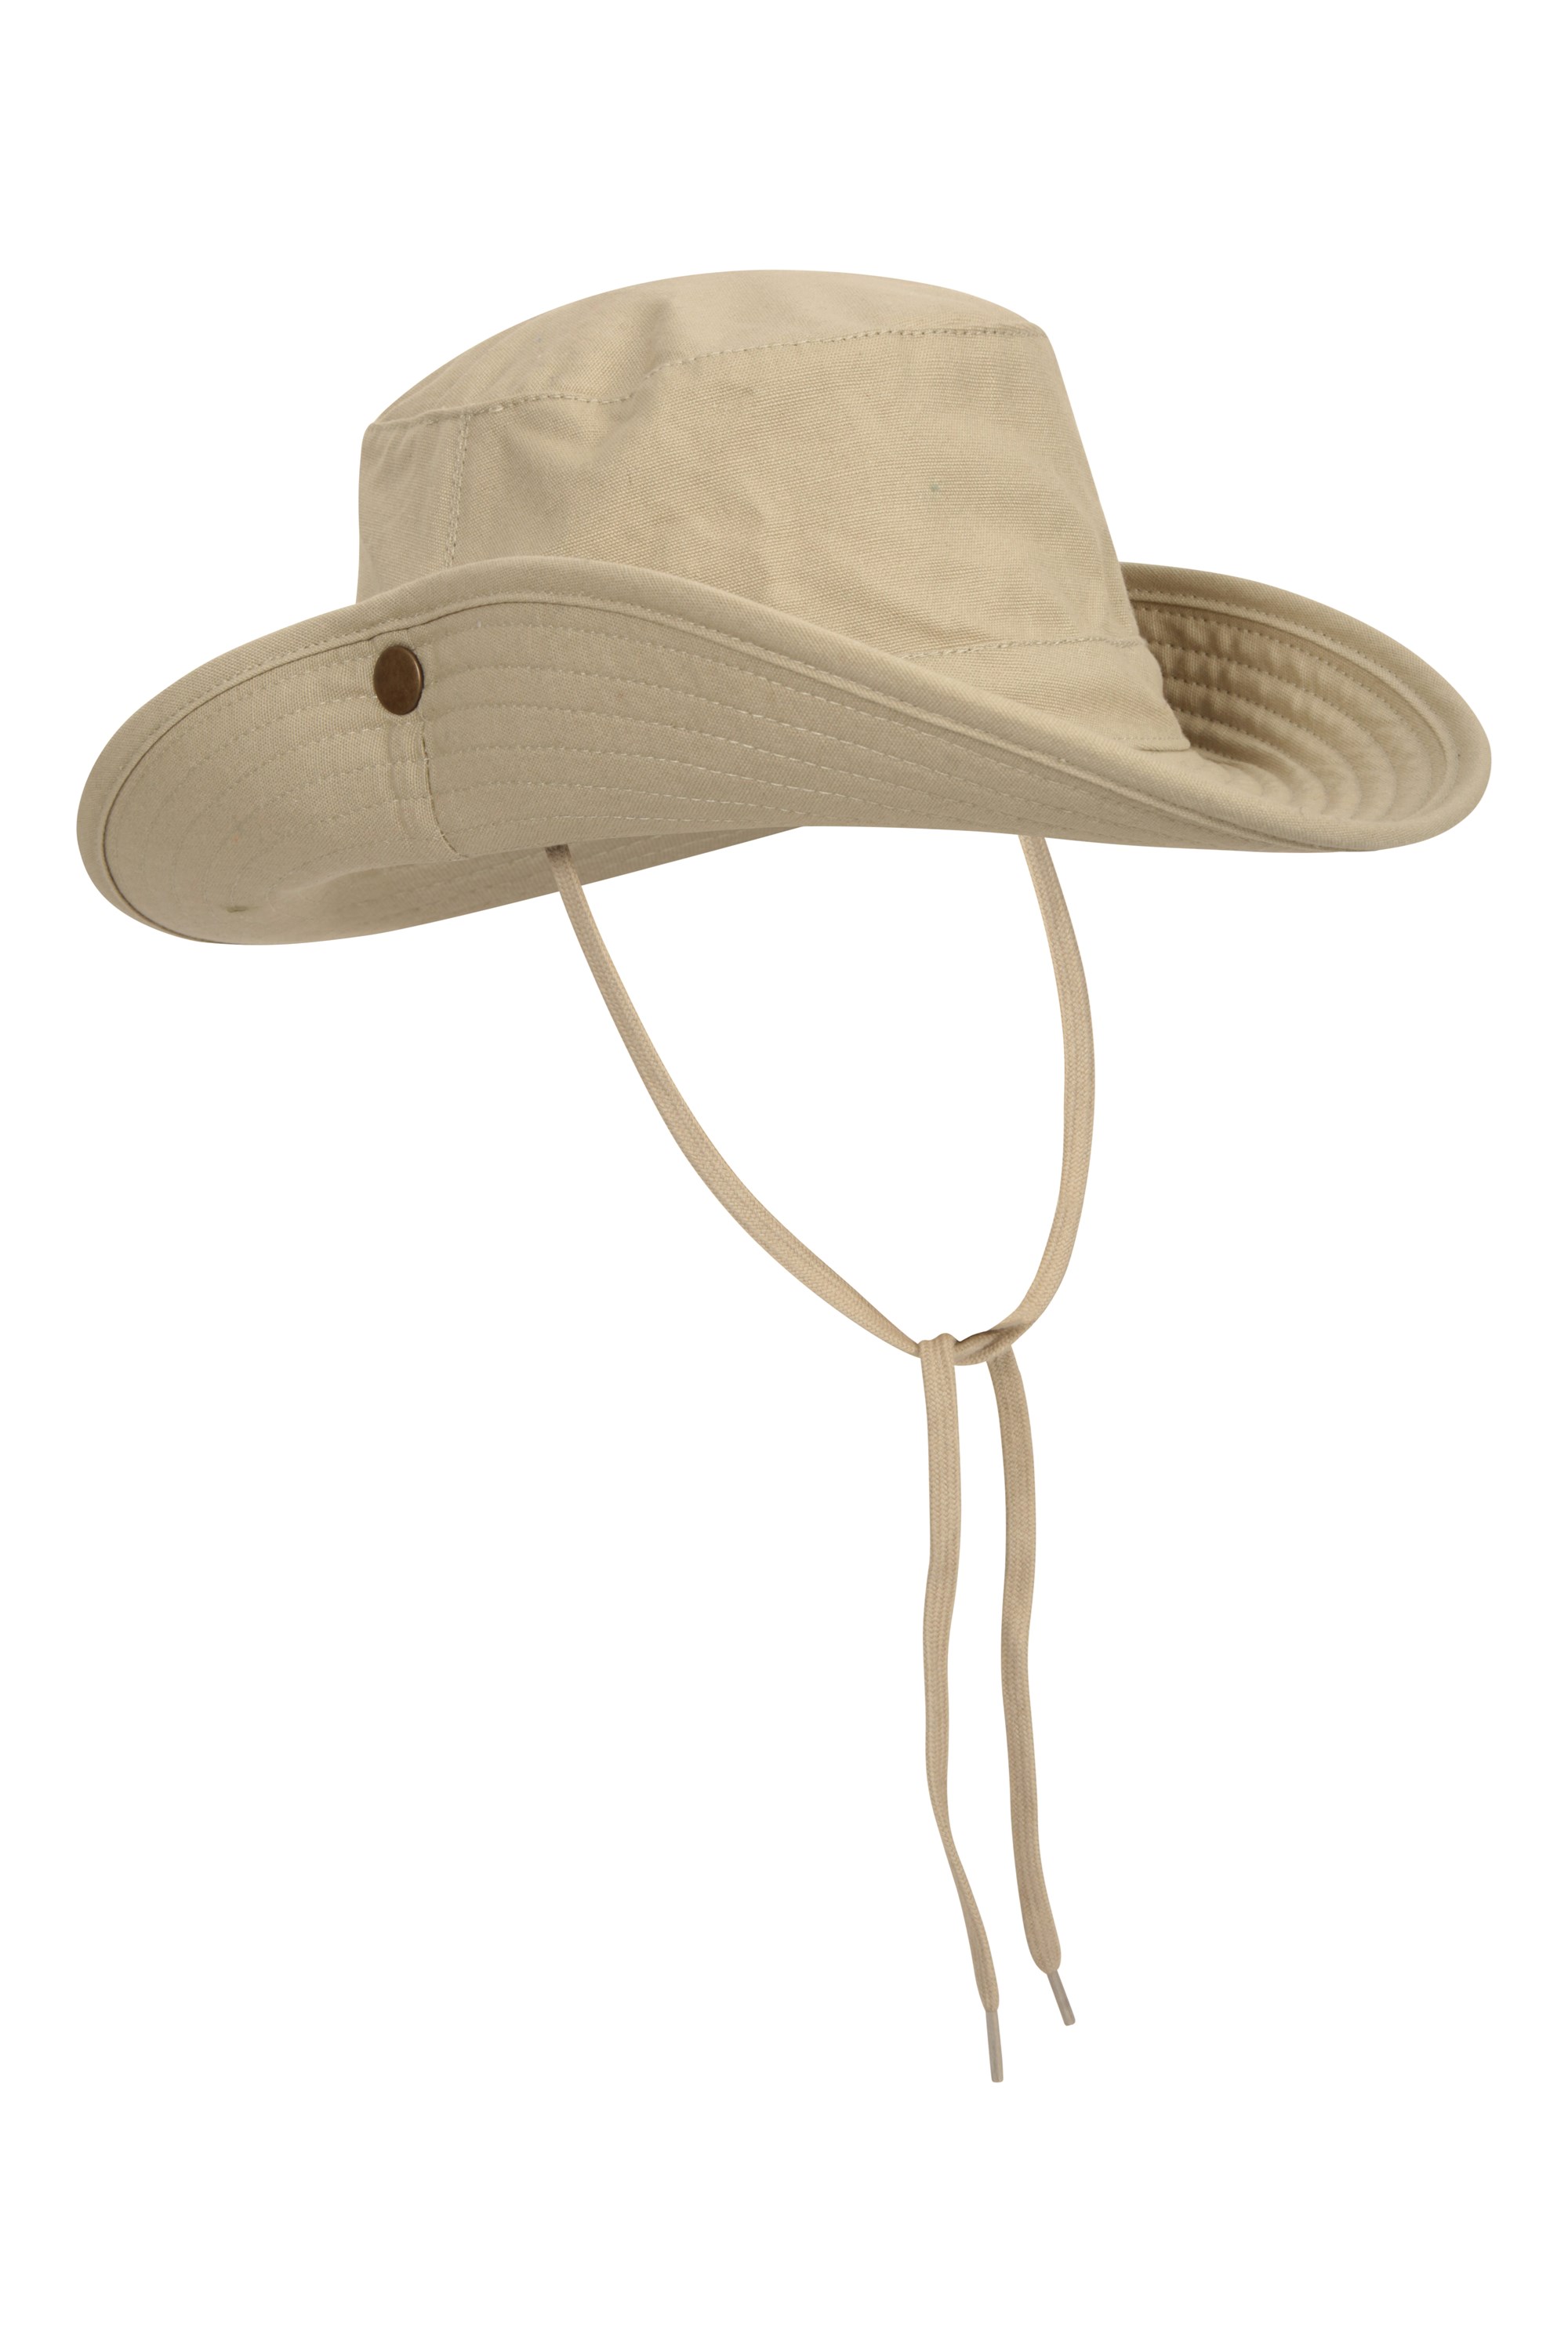 Mountain Warehouse Irwin Mens Water-Resistant Travel Hat - Beige | Size One